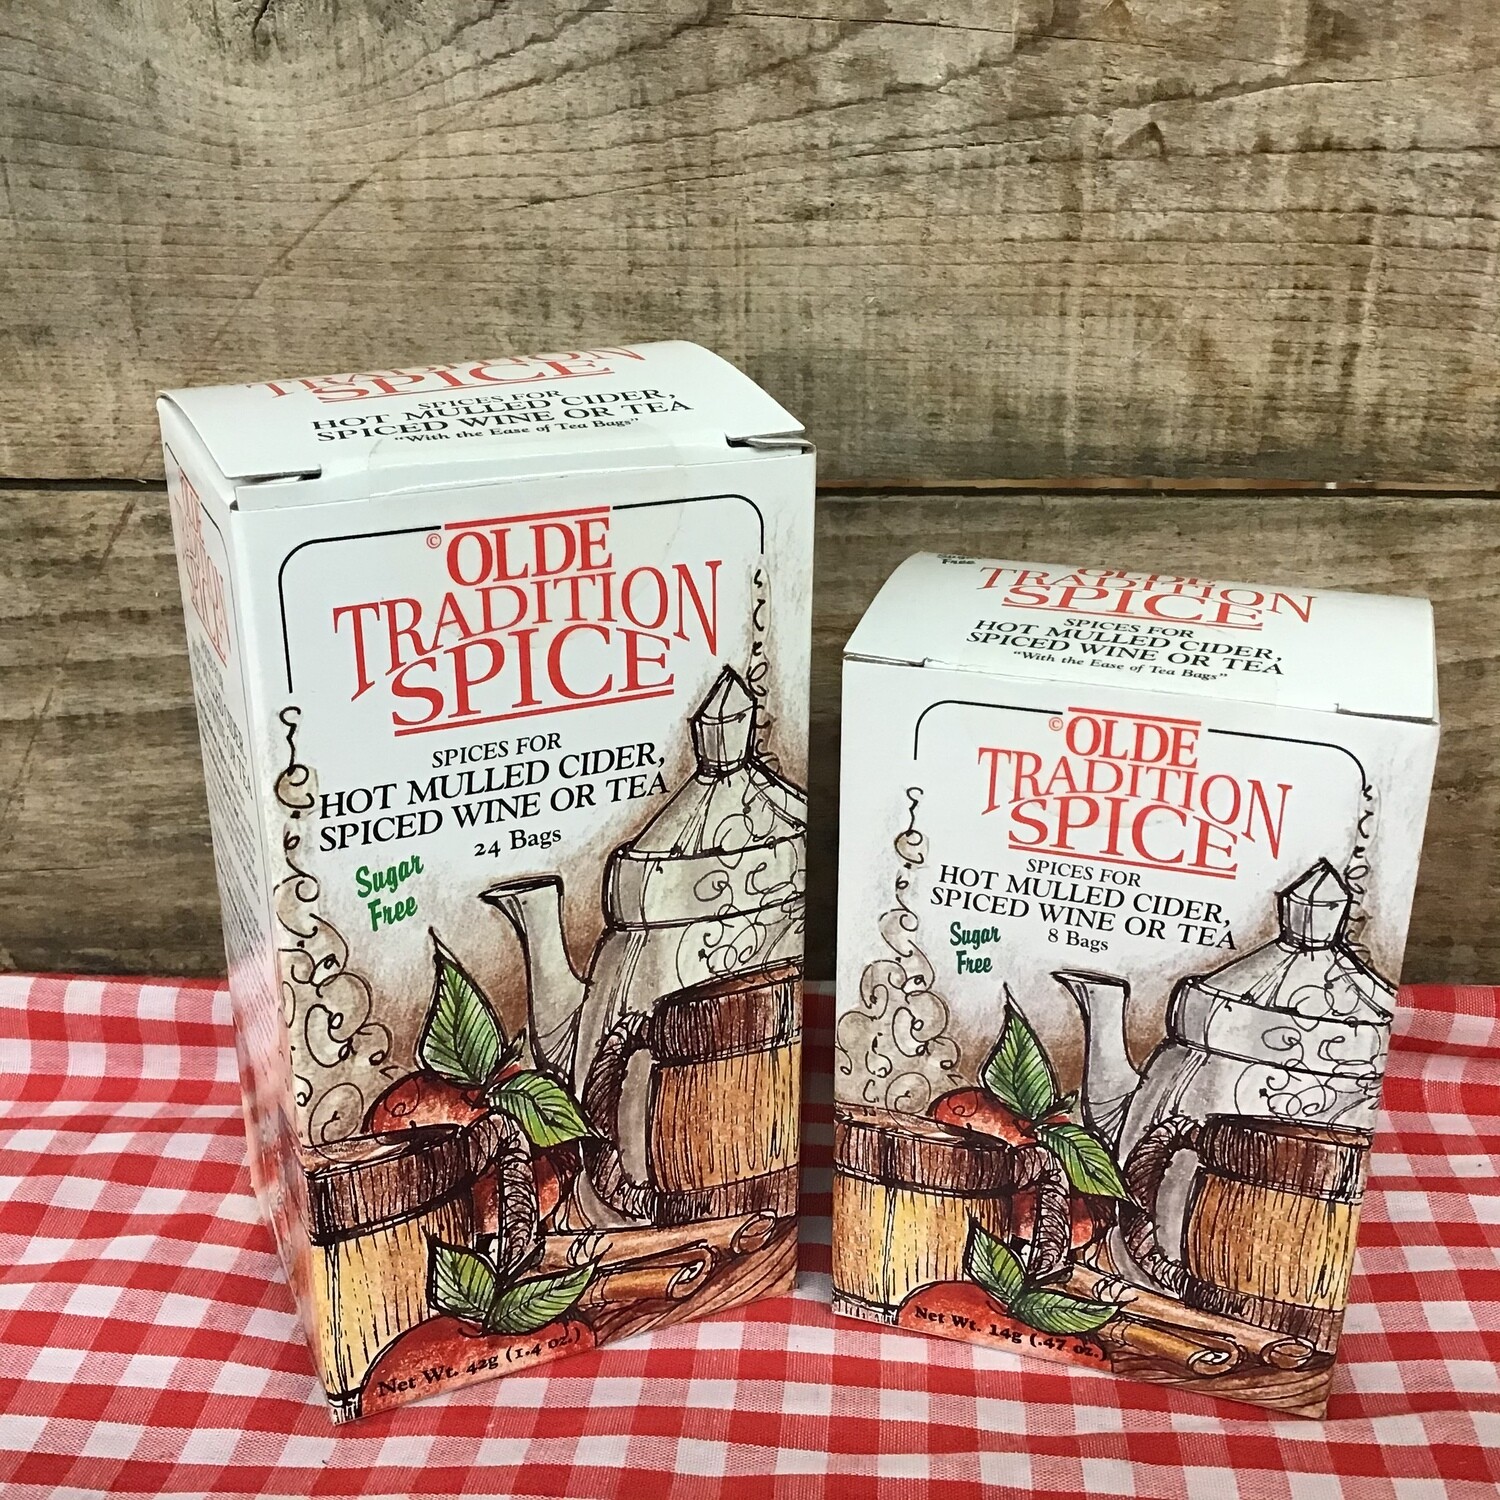 Olde Tradition Spice 24 bag box